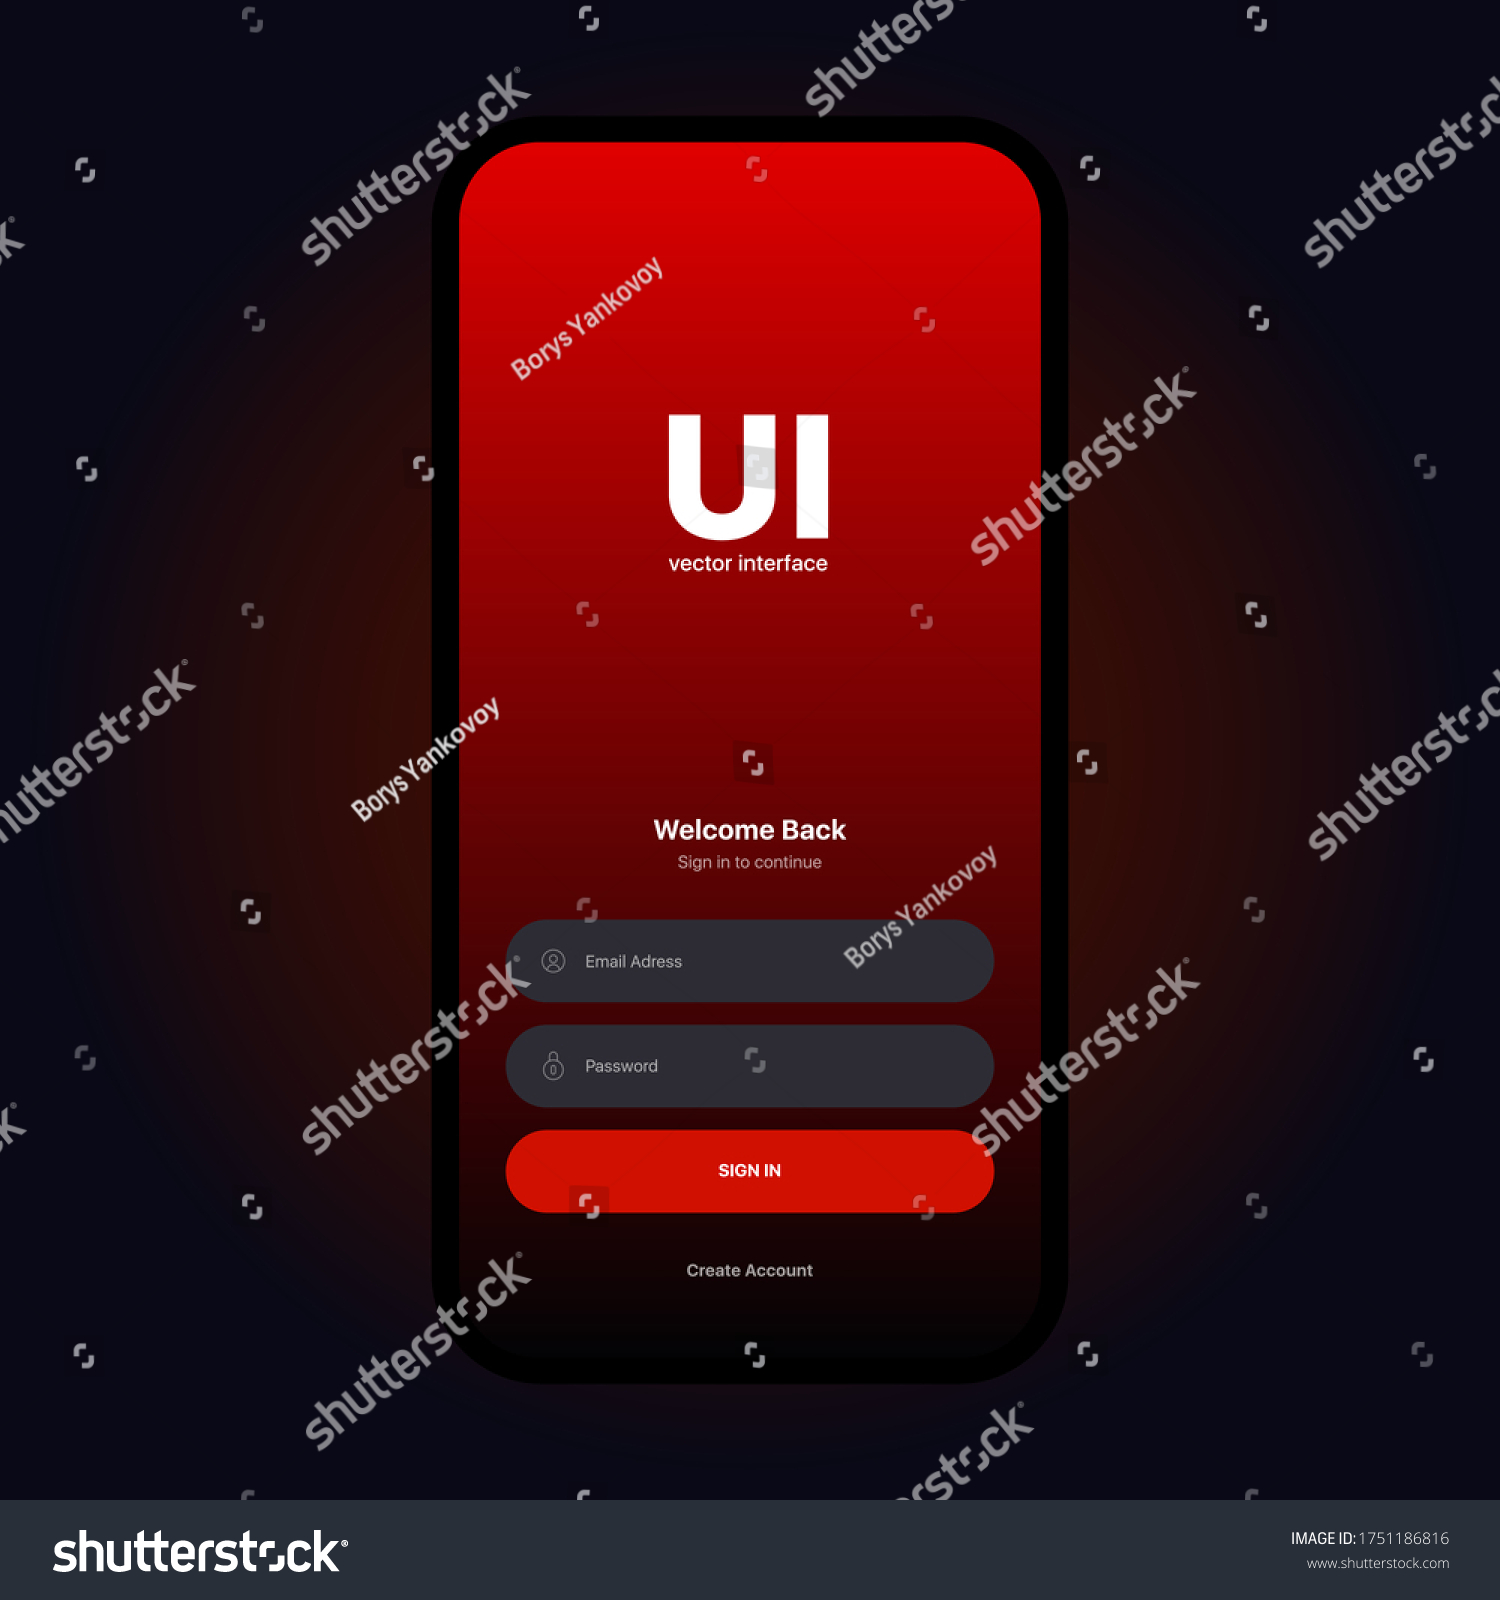 Login UI Interface. Sign In Screen. Mobile App - Royalty Free Stock ...